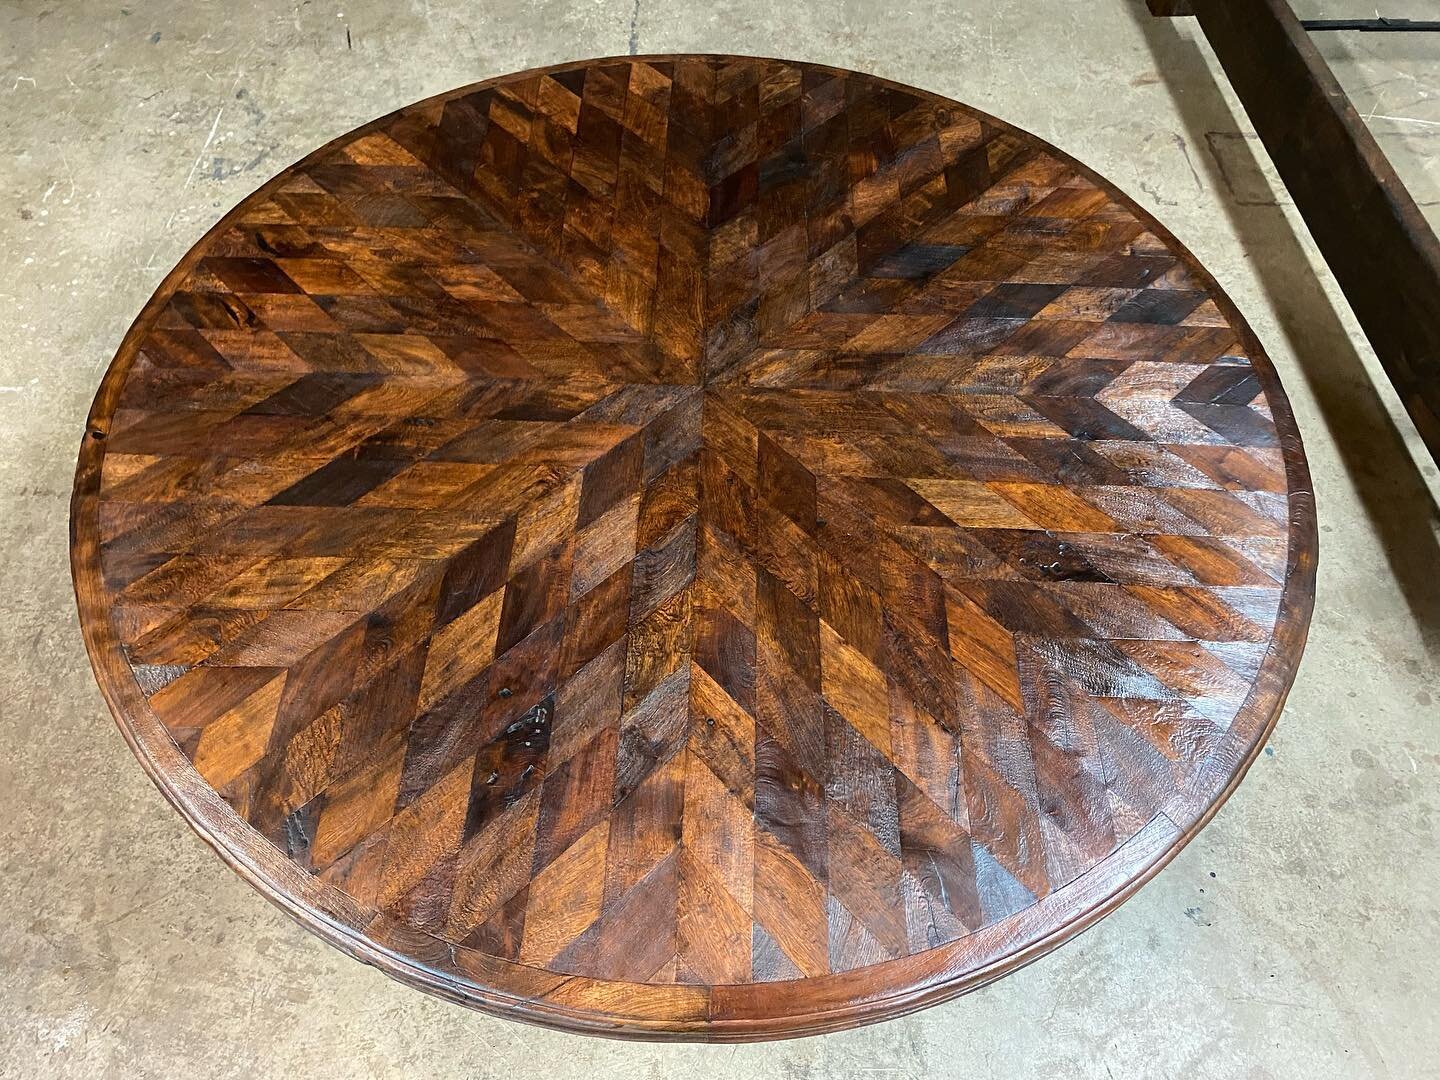 A beautifully patterned table top. Each diamond is hand cut and placed to create a beautiful blend of the natural grain pattern. #tables #handcraftedfurniture #beautifulhomes #customfurniture #interiordesign #interiorinspiration #craftsmanship